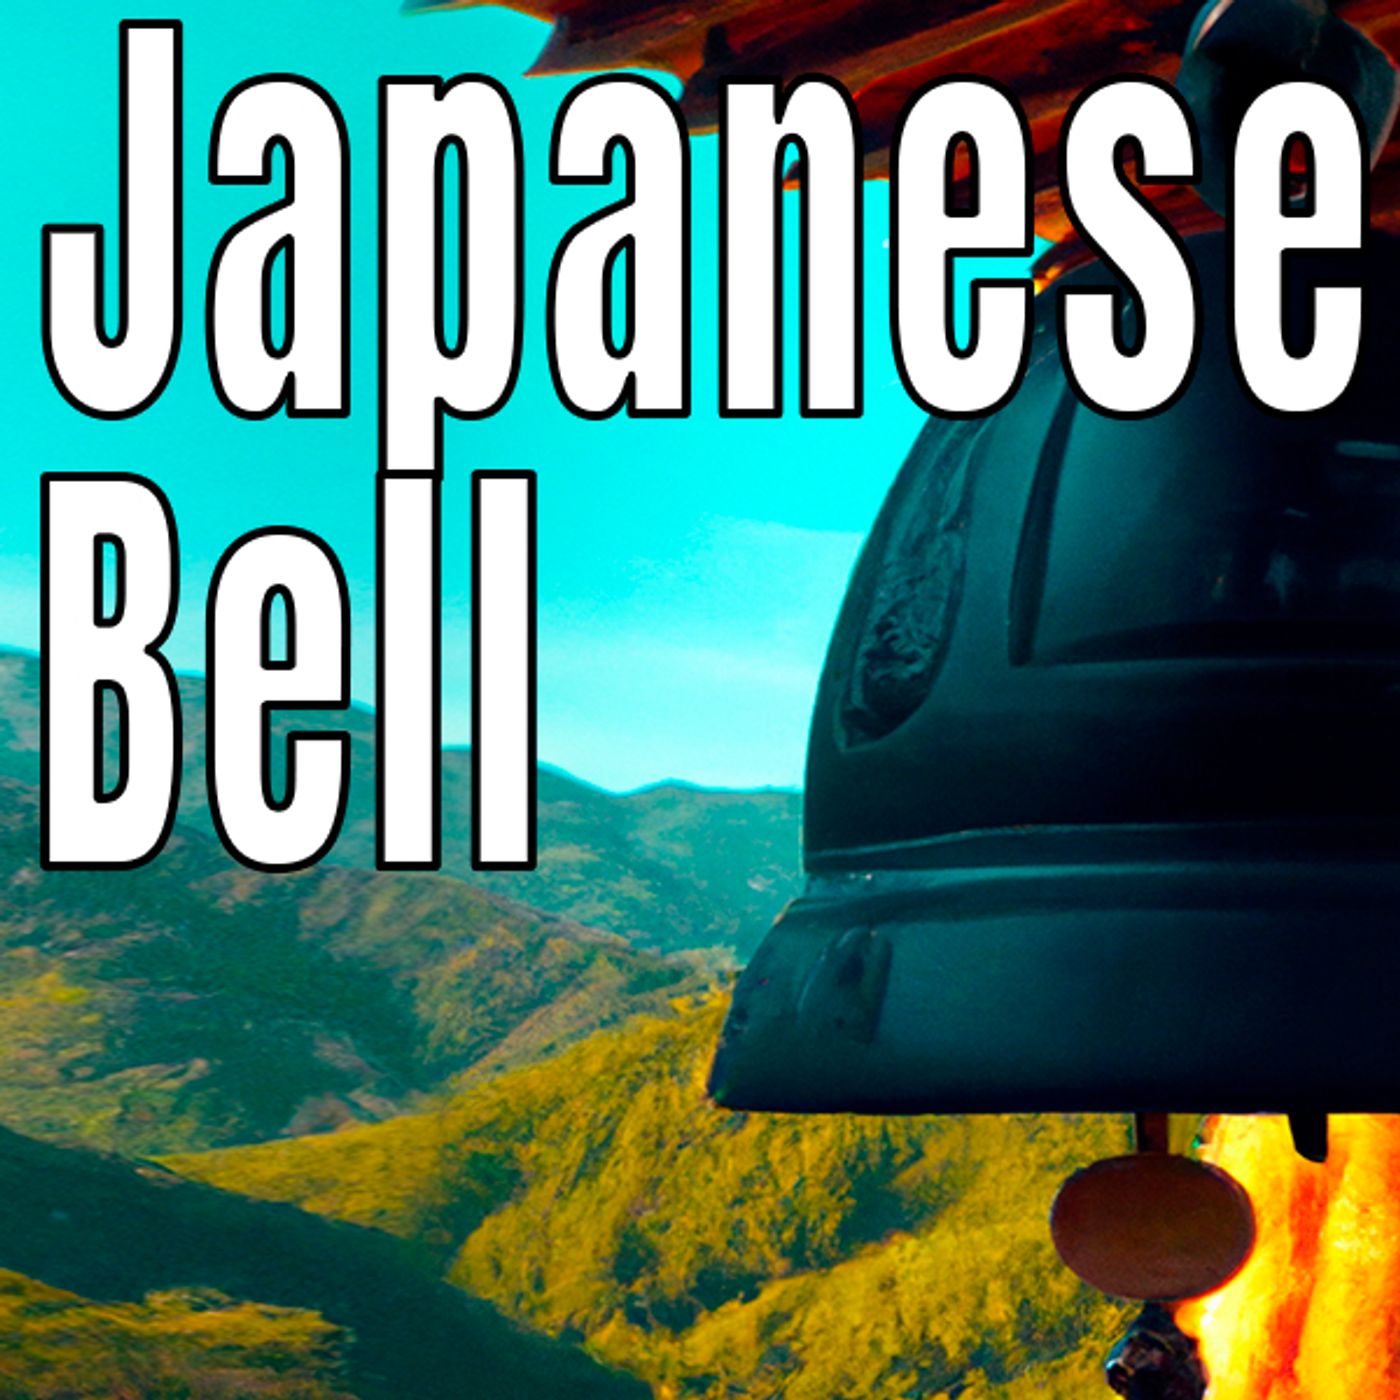 Ghost Mission: A Bell’s Redemption - Saving Time in a Japanese Temple